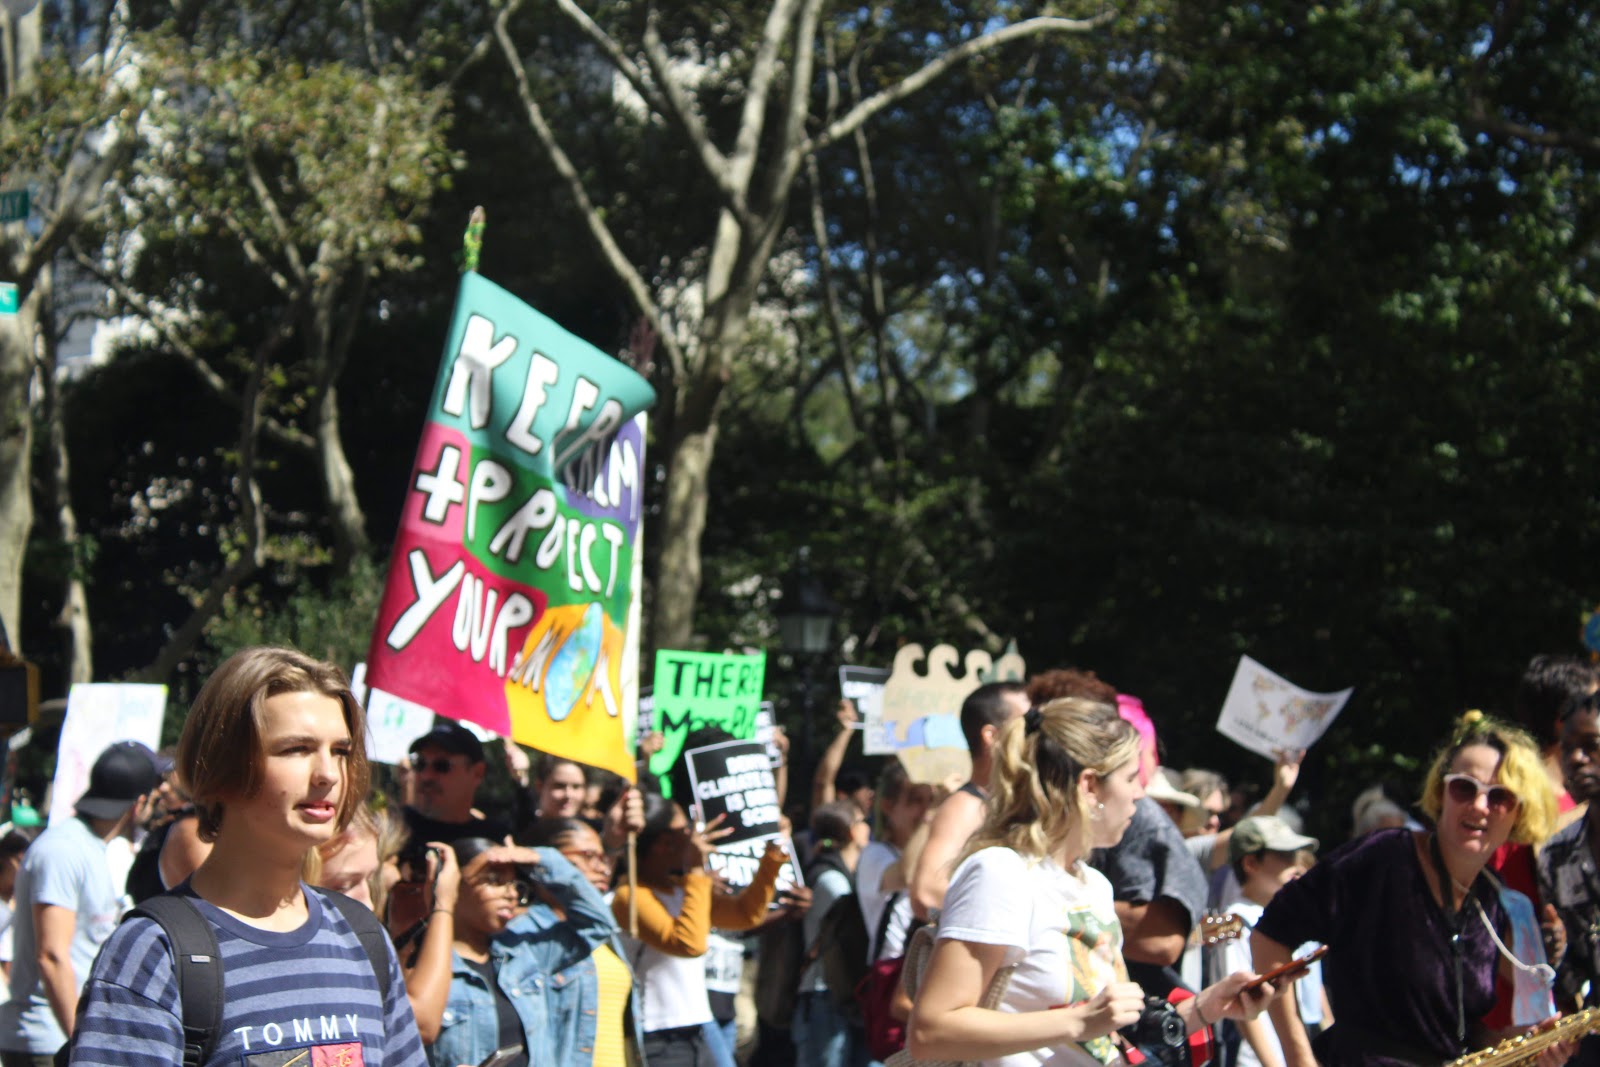 NYC GLOBAL CLIMATE STRIKE 2019: “This is the biggest climate strike in ...